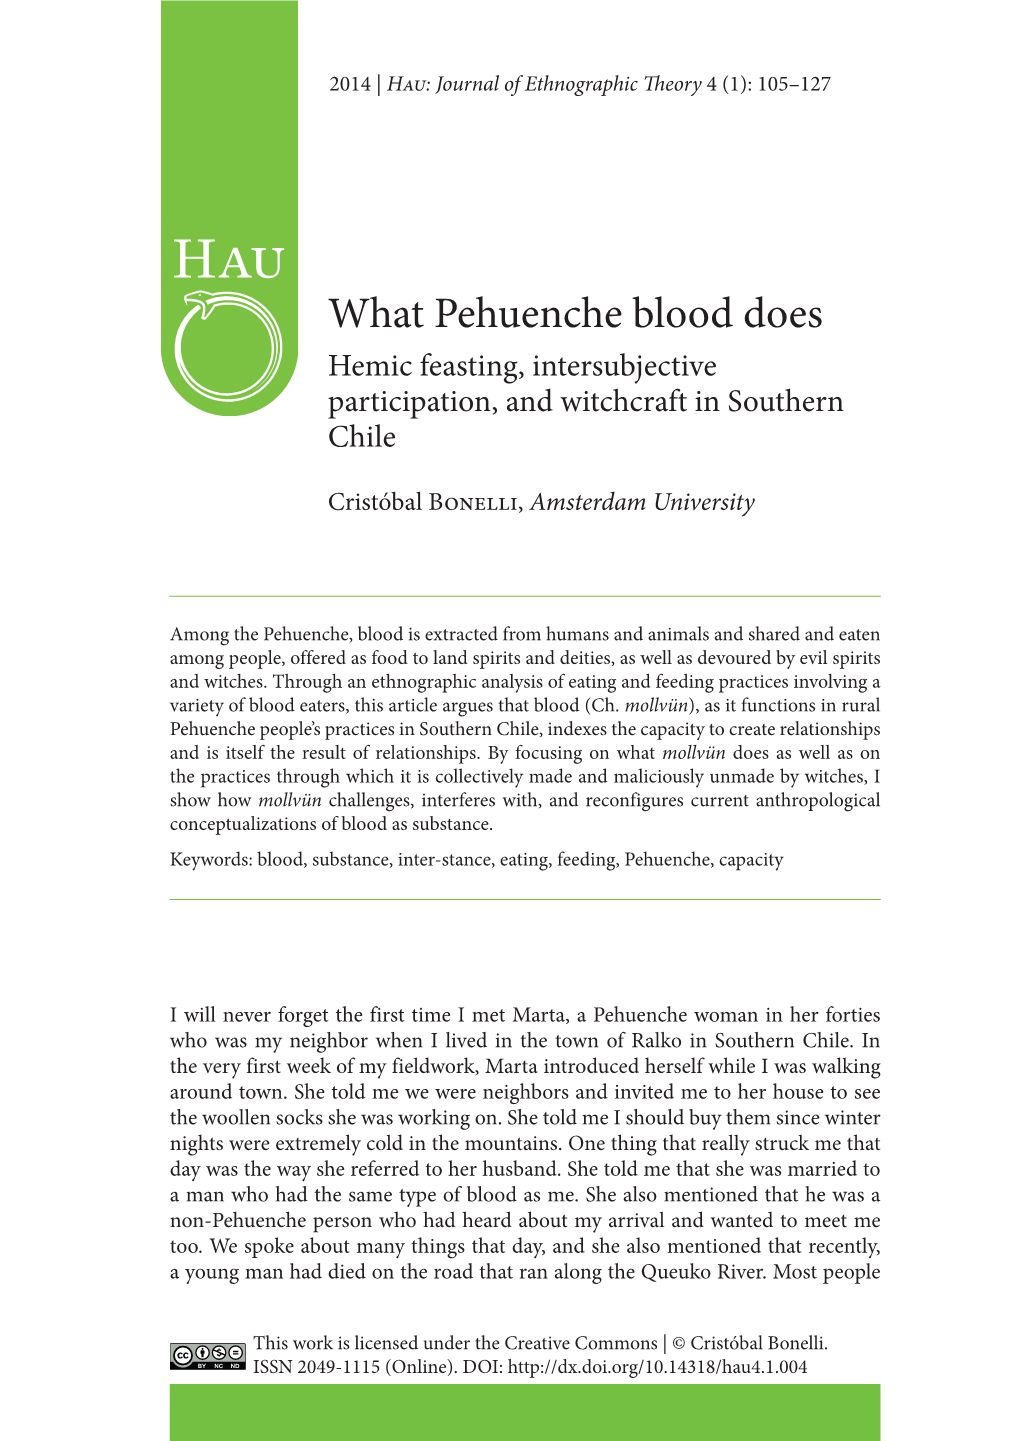 What Pehuenche Blood Does Hemic Feasting, Intersubjective Participation, and Witchcraft in Southern Chile